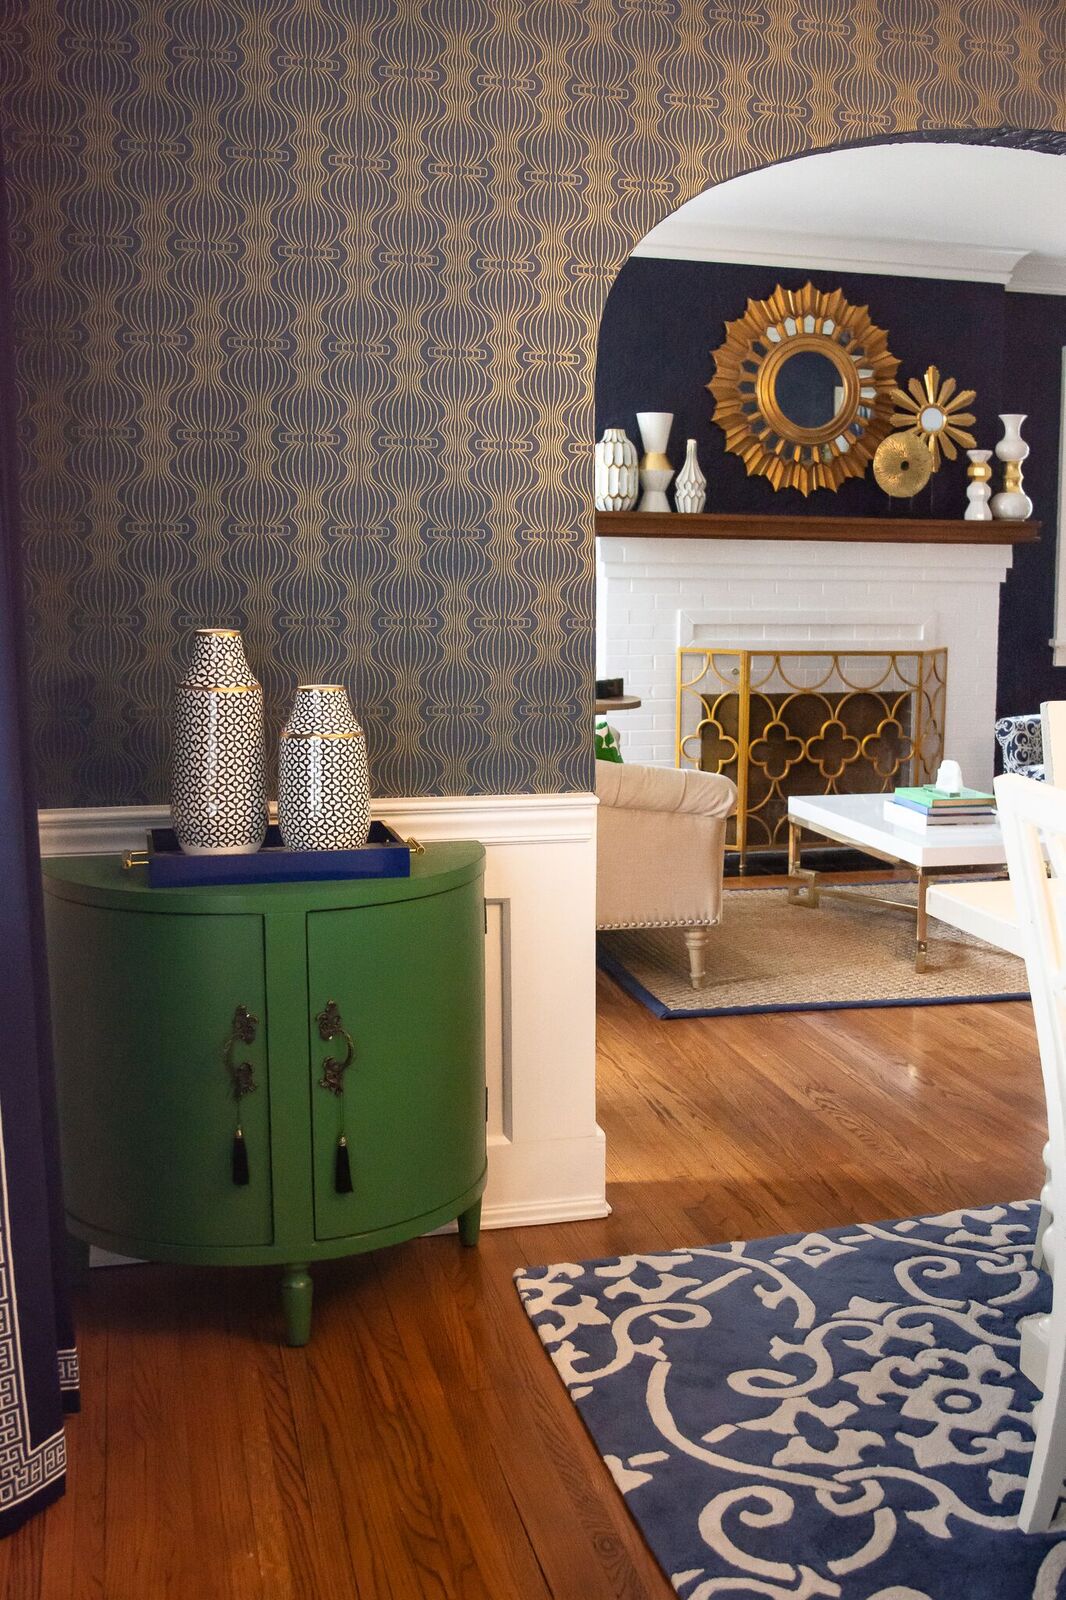 Kate Spade inspired dining room by JSB Designs